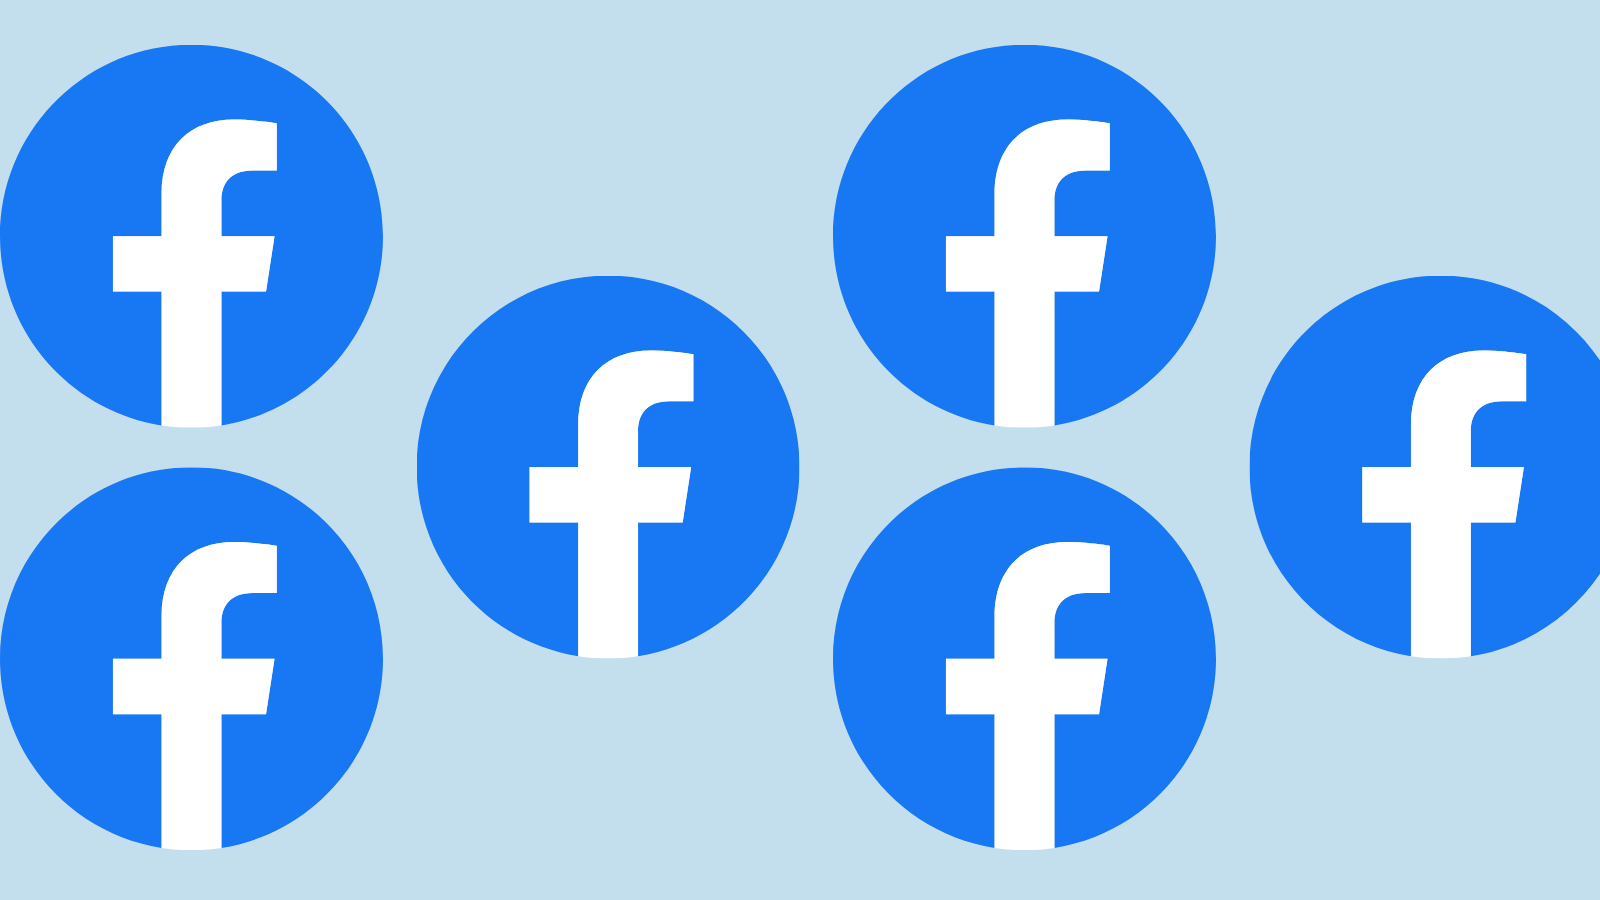 The Facebook logo in a repeated pattern